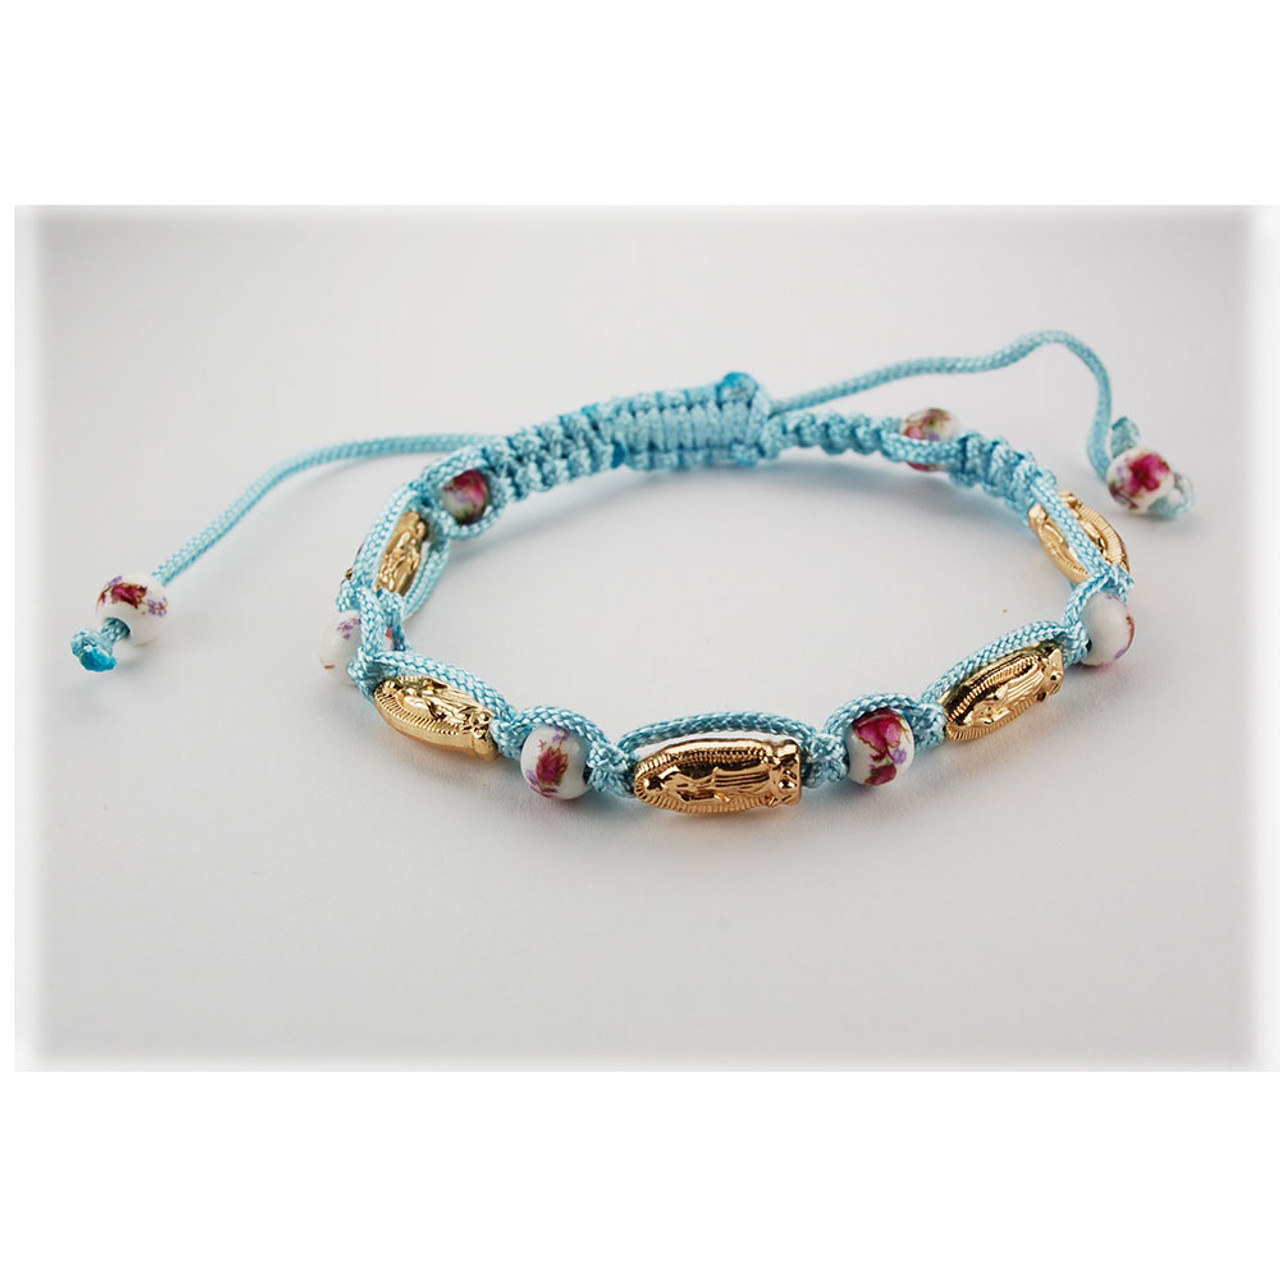 Our Lady Guadalupe Bracelet